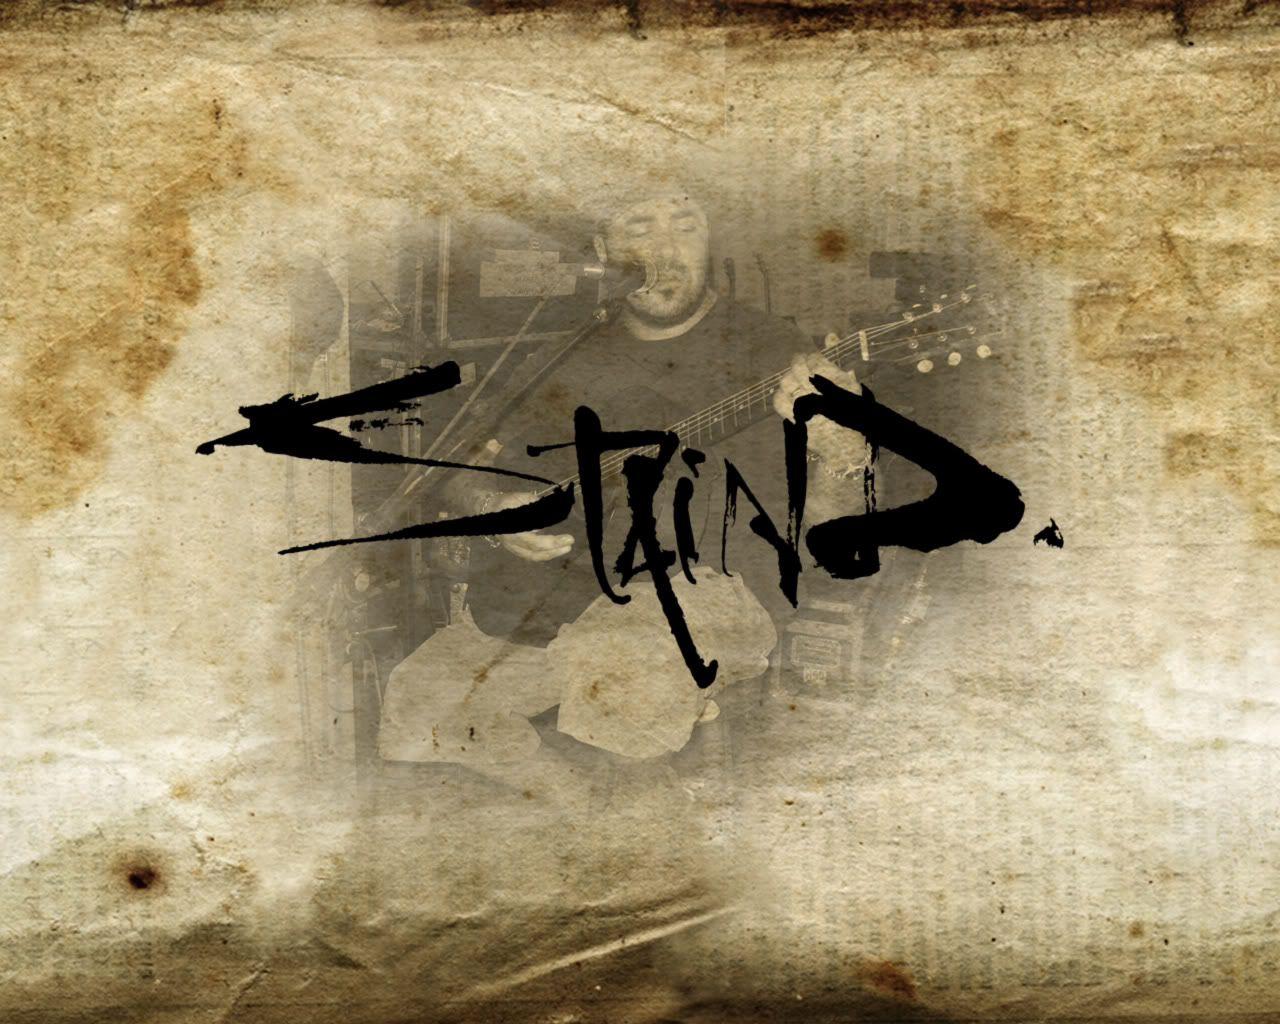 Staind Logo - Staind logo with Aaron Lewis in the background. | Staind | Pinterest ...